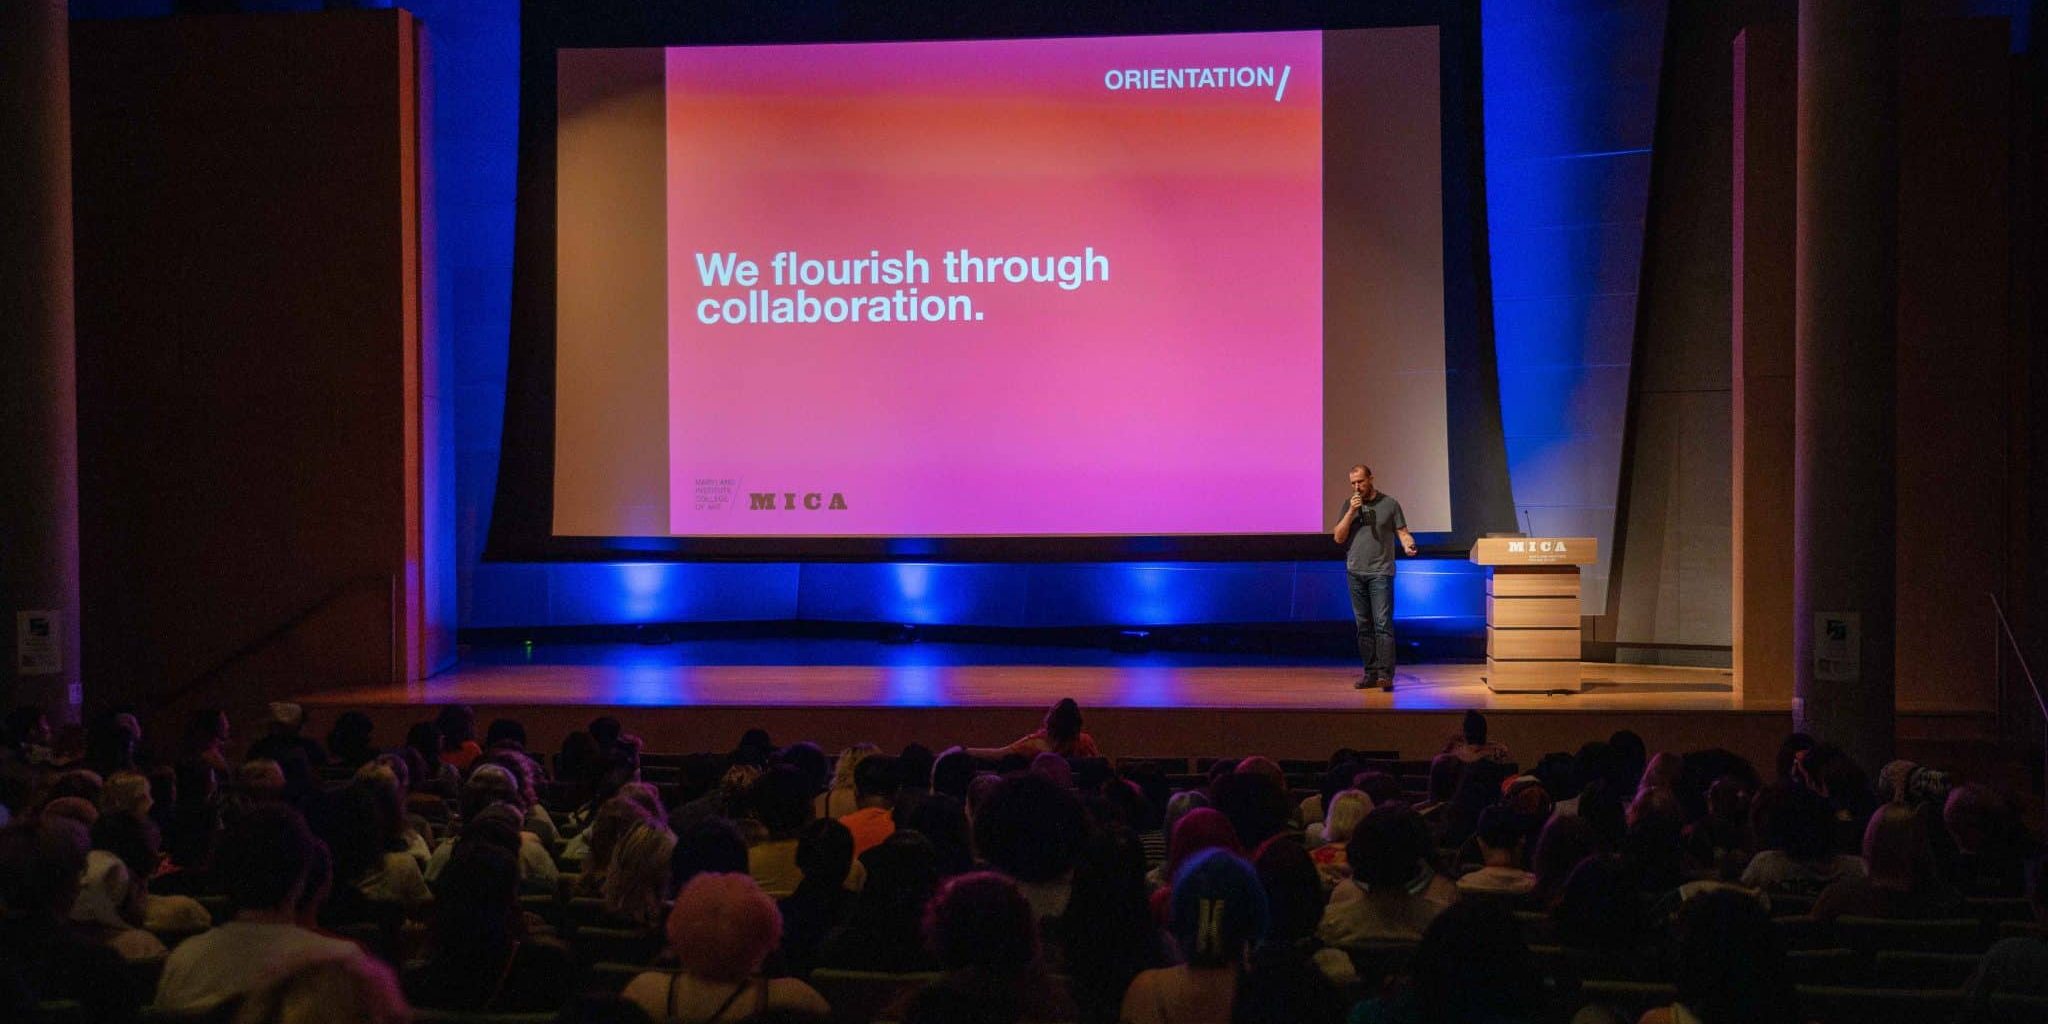 Event Recording and Live Streaming example: A man stands on stage with a large pink slide behind him reading "We flourish through collaboration." An audience pays attention.